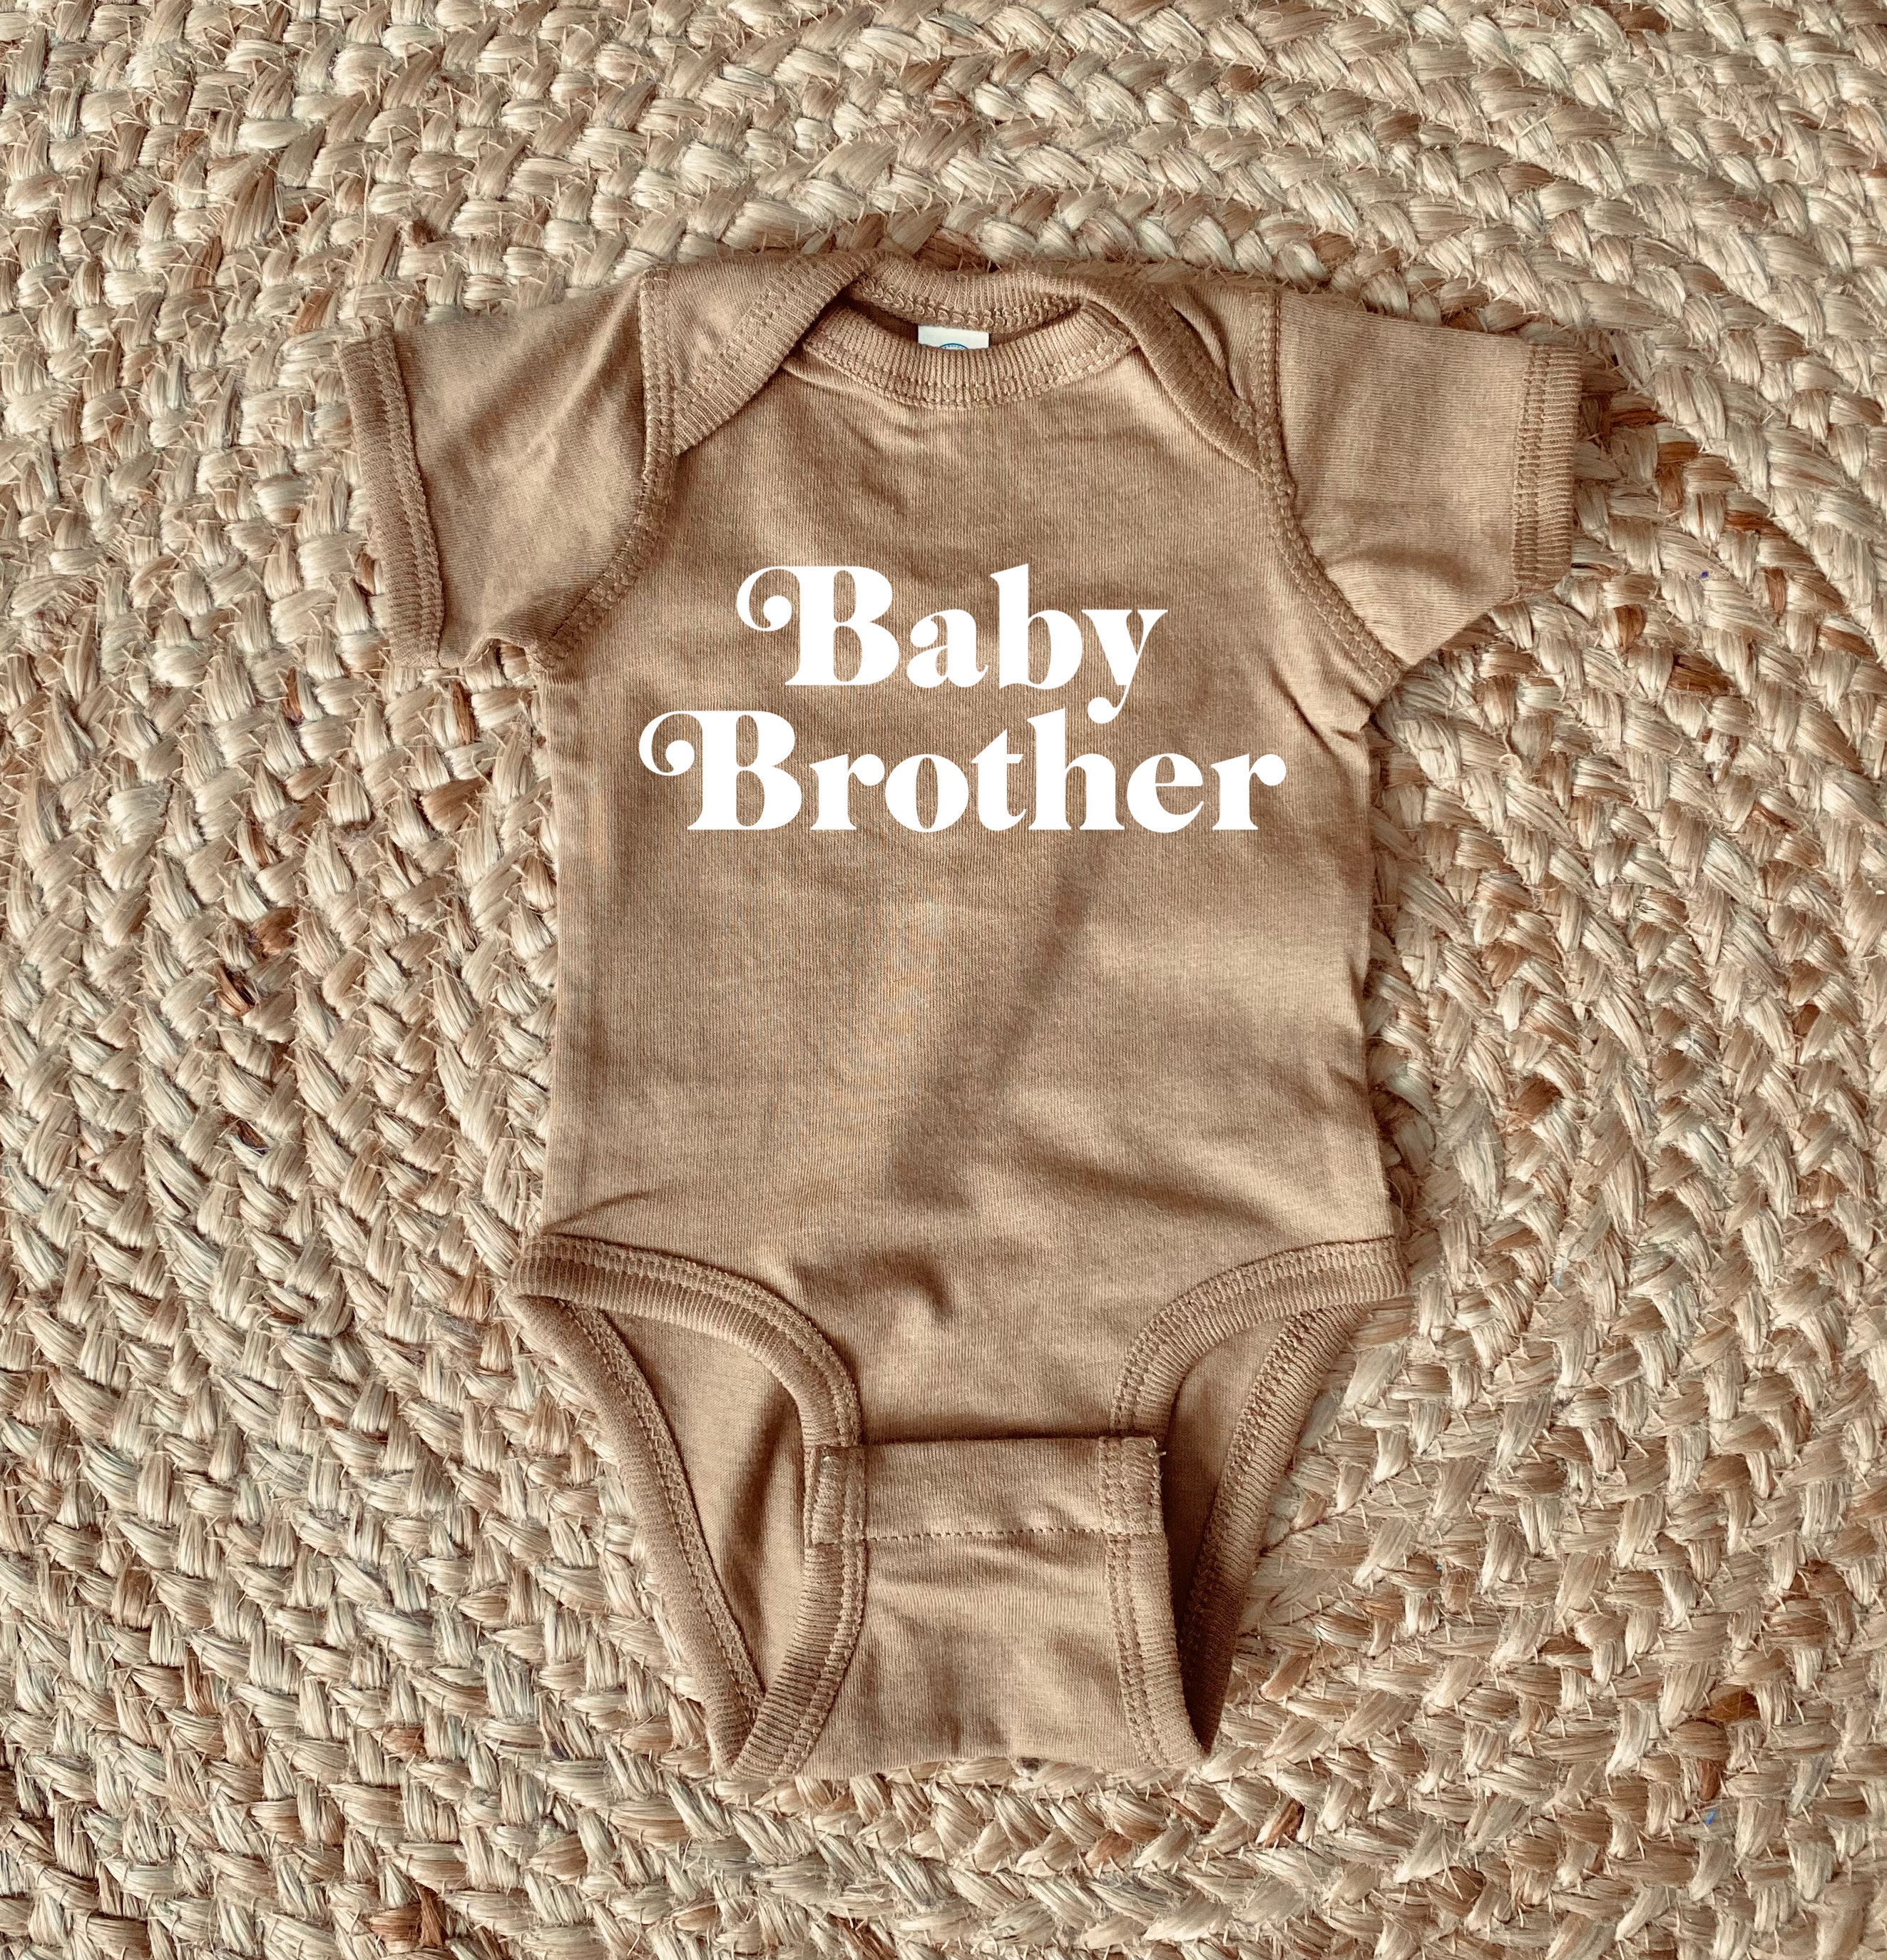 Little Bro bodysuit or shirt baby kids short or long sleeve baby announcement onsie little brother baby brother daily threads